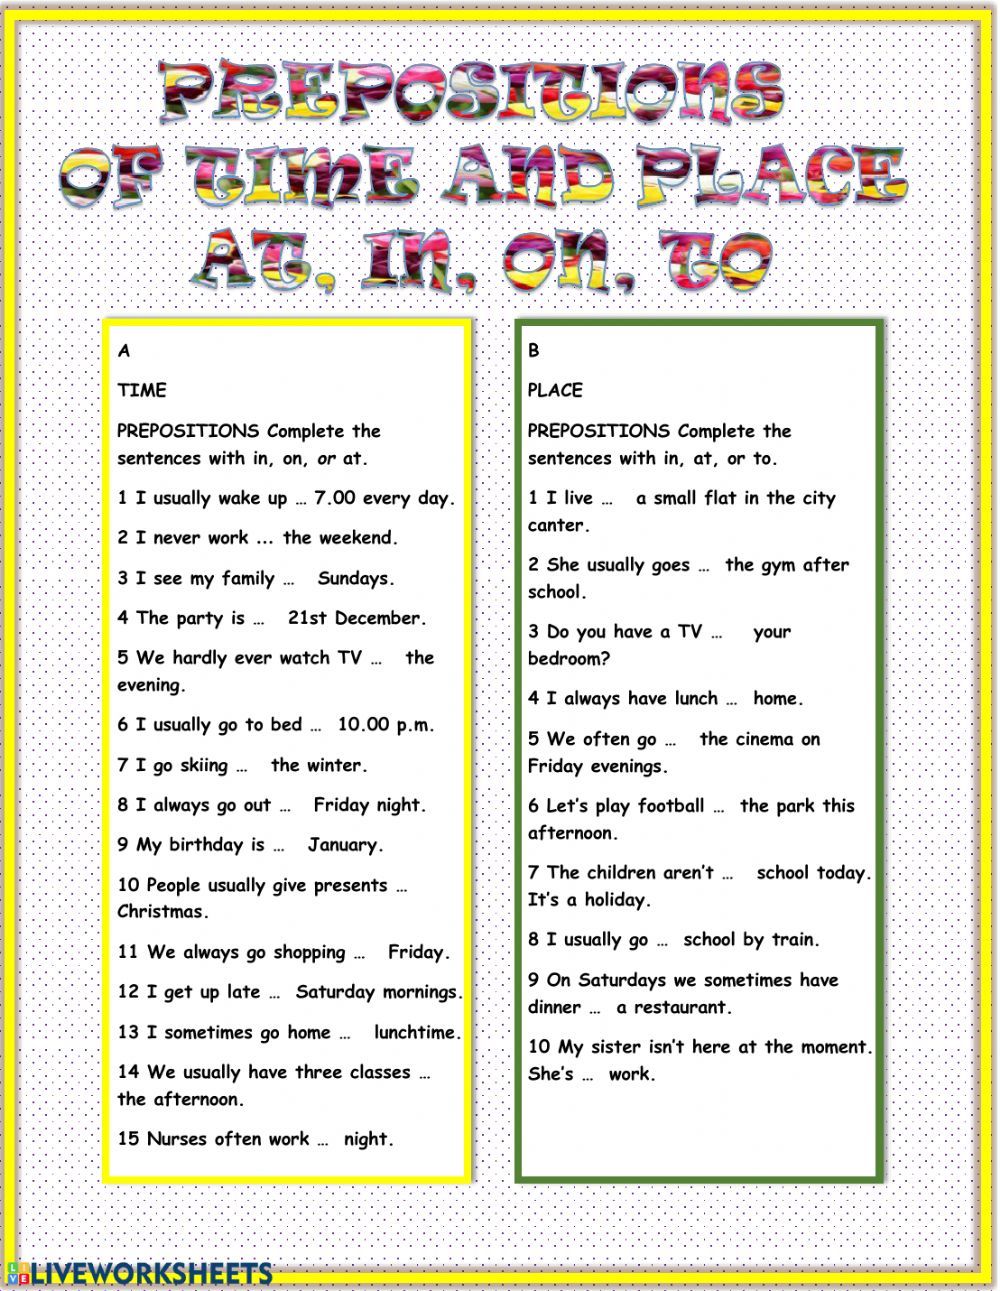 prepositions of time and place worksheet pdf